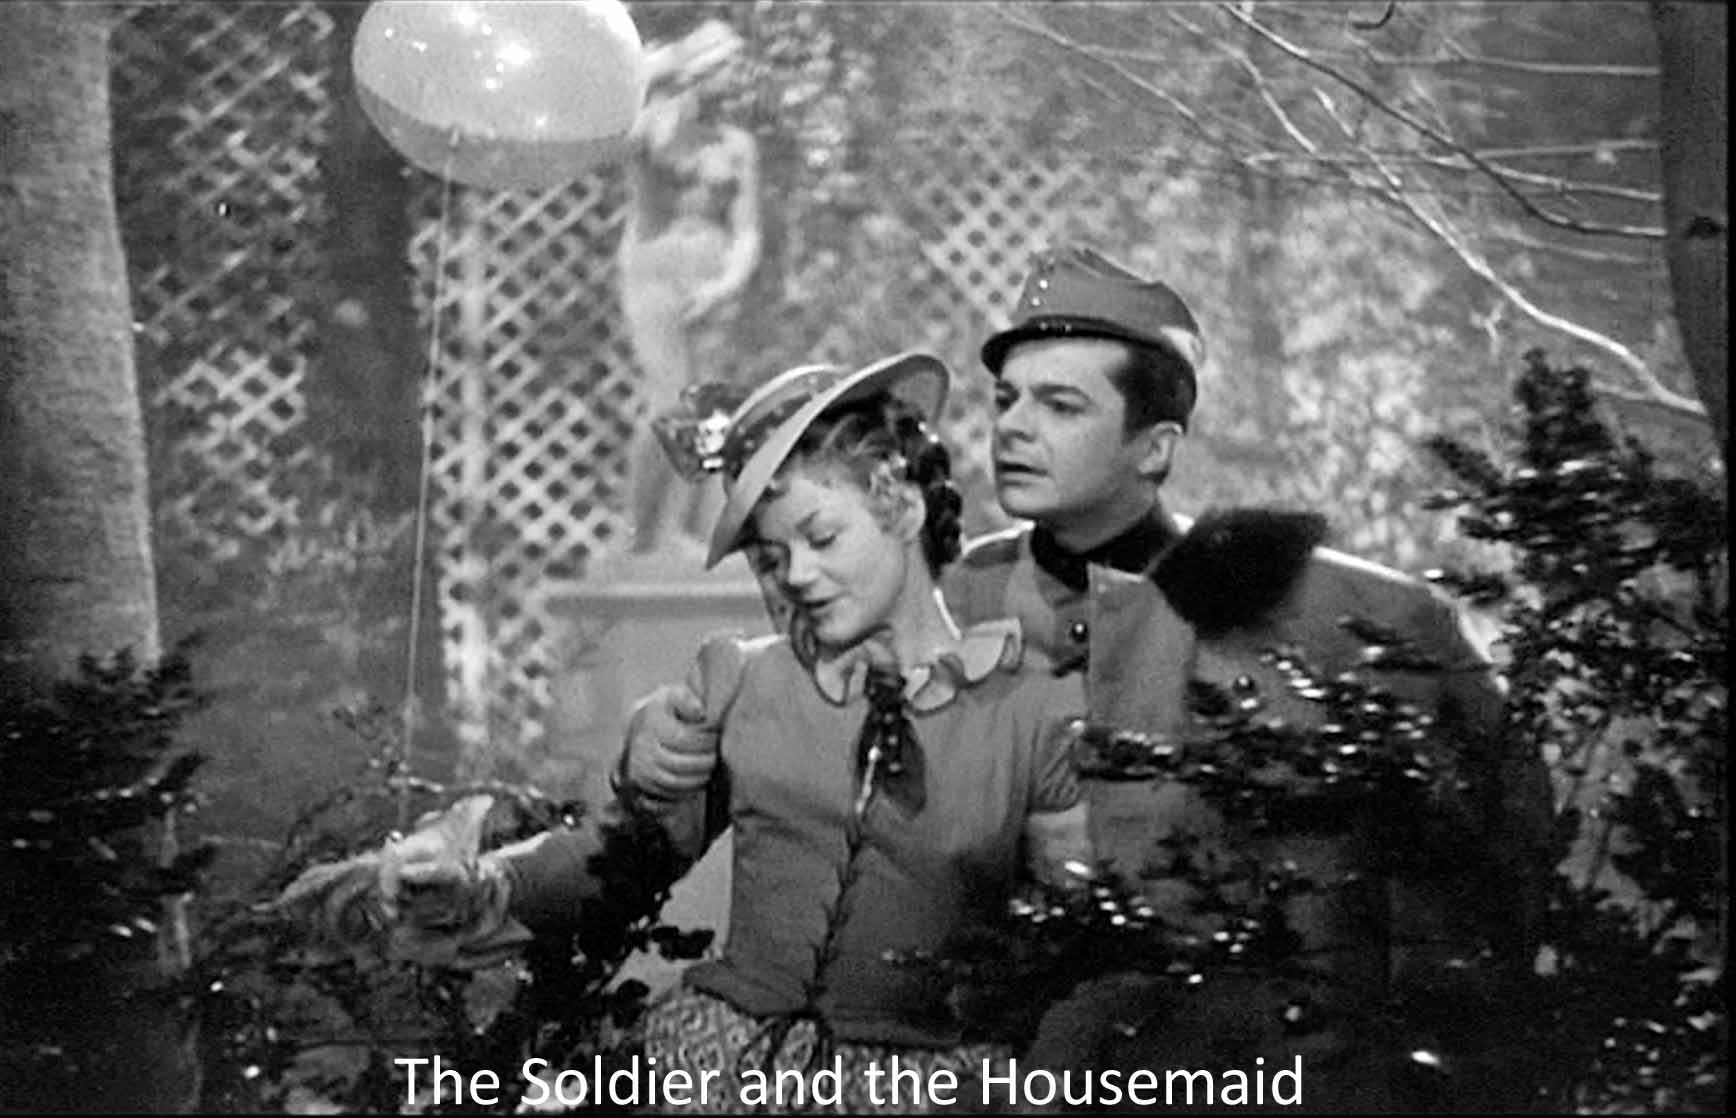 The Soldier and the Housemaid